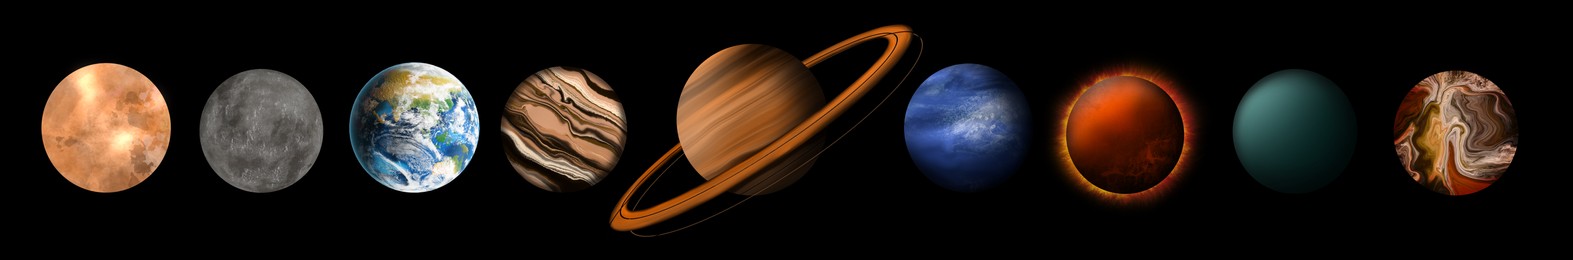 Illustration of Set with many different planets on dark background, banner design